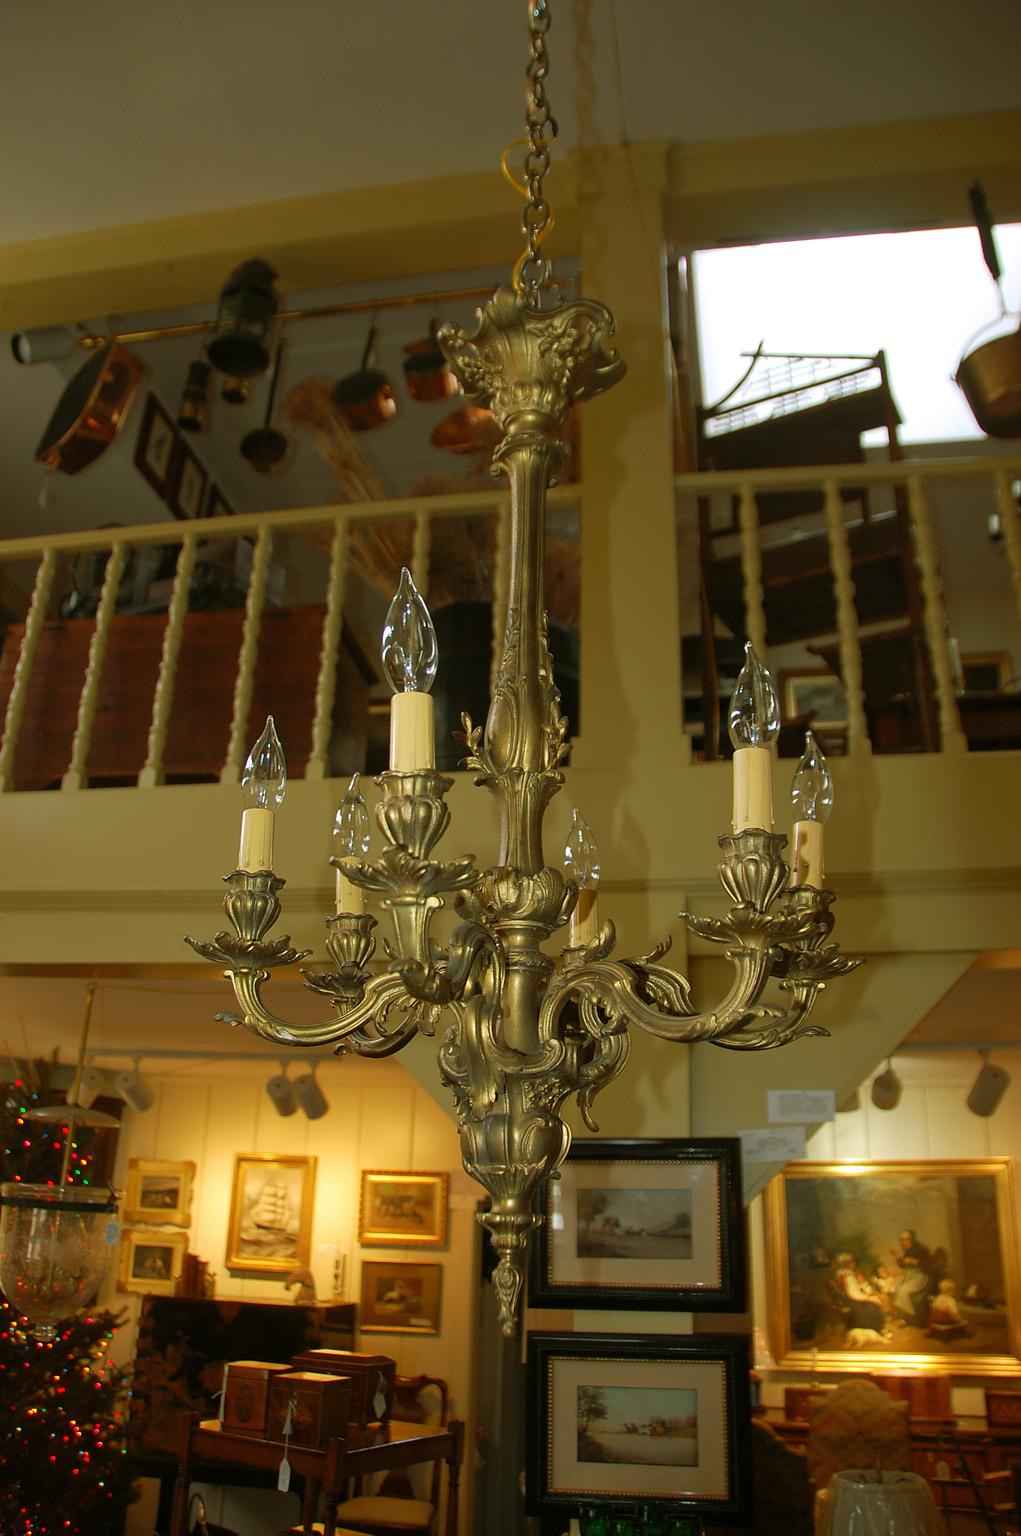 English Victorian rococo chandelier in gilded cast bronze with six arms. This medium sized chandelier has a recurring theme of acanthus leaves. Acanthus leaves appear in the arms, the drip pans, the candle cups and on the central stem and ball. This